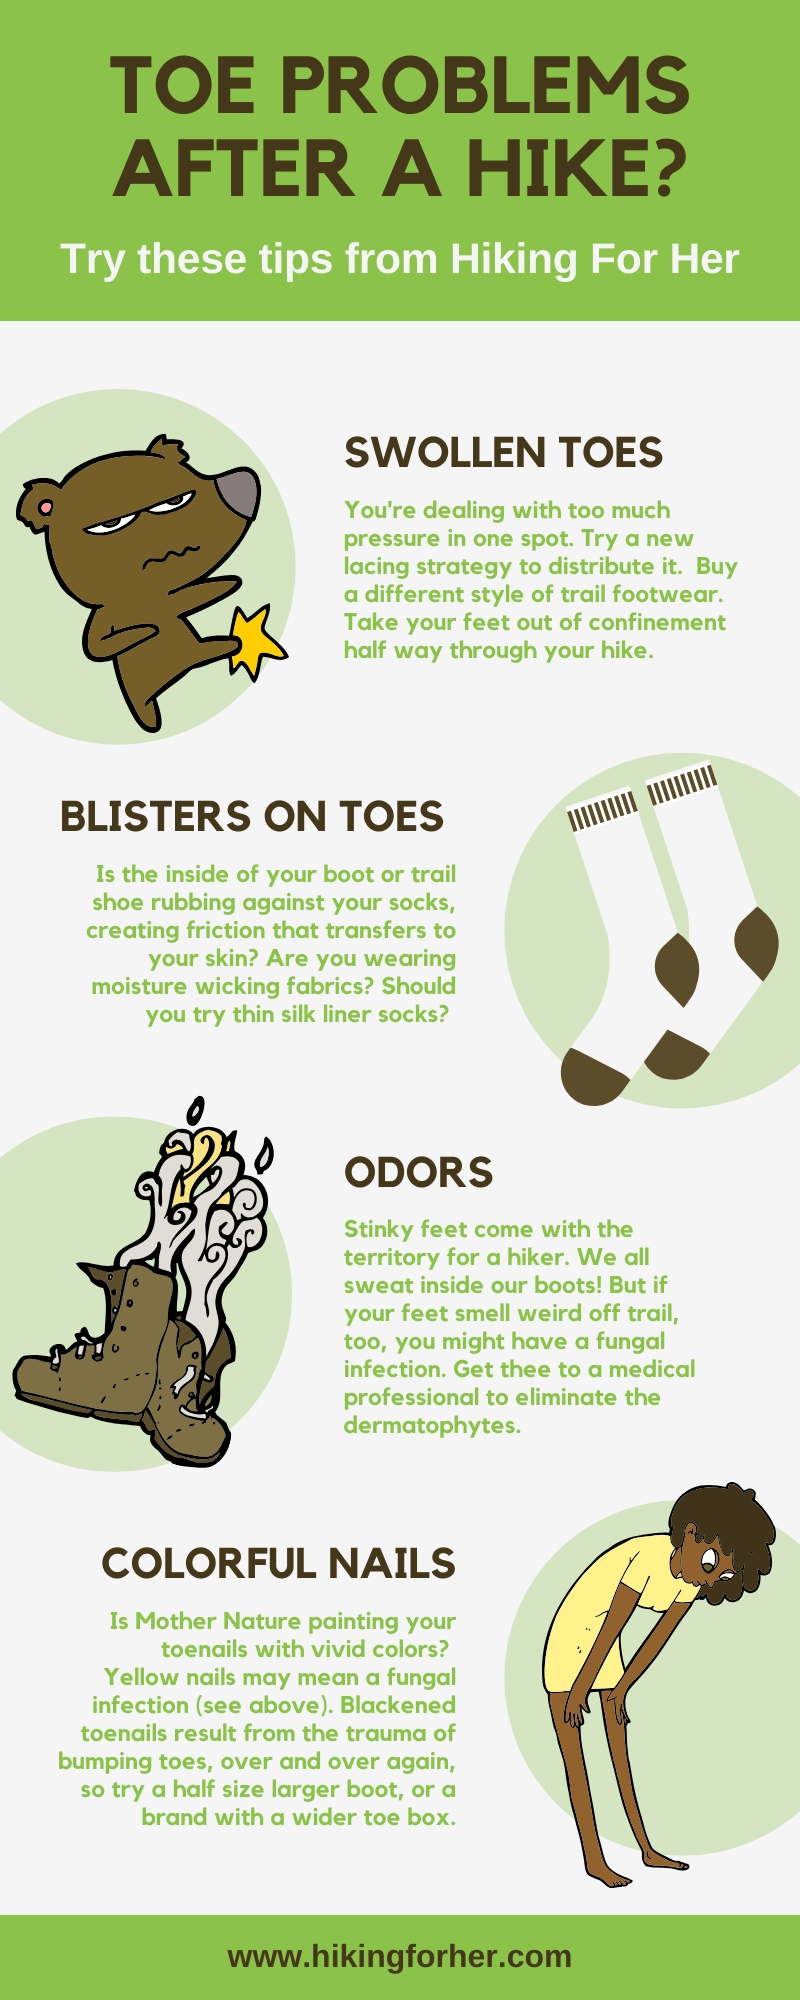 Toe problems after hiking? Hiking For Her shares tips to solve or avoid sore toes. #soretoes #toeproblems #hikingtips #backpackingtips #hikingselfcare #hikingforher